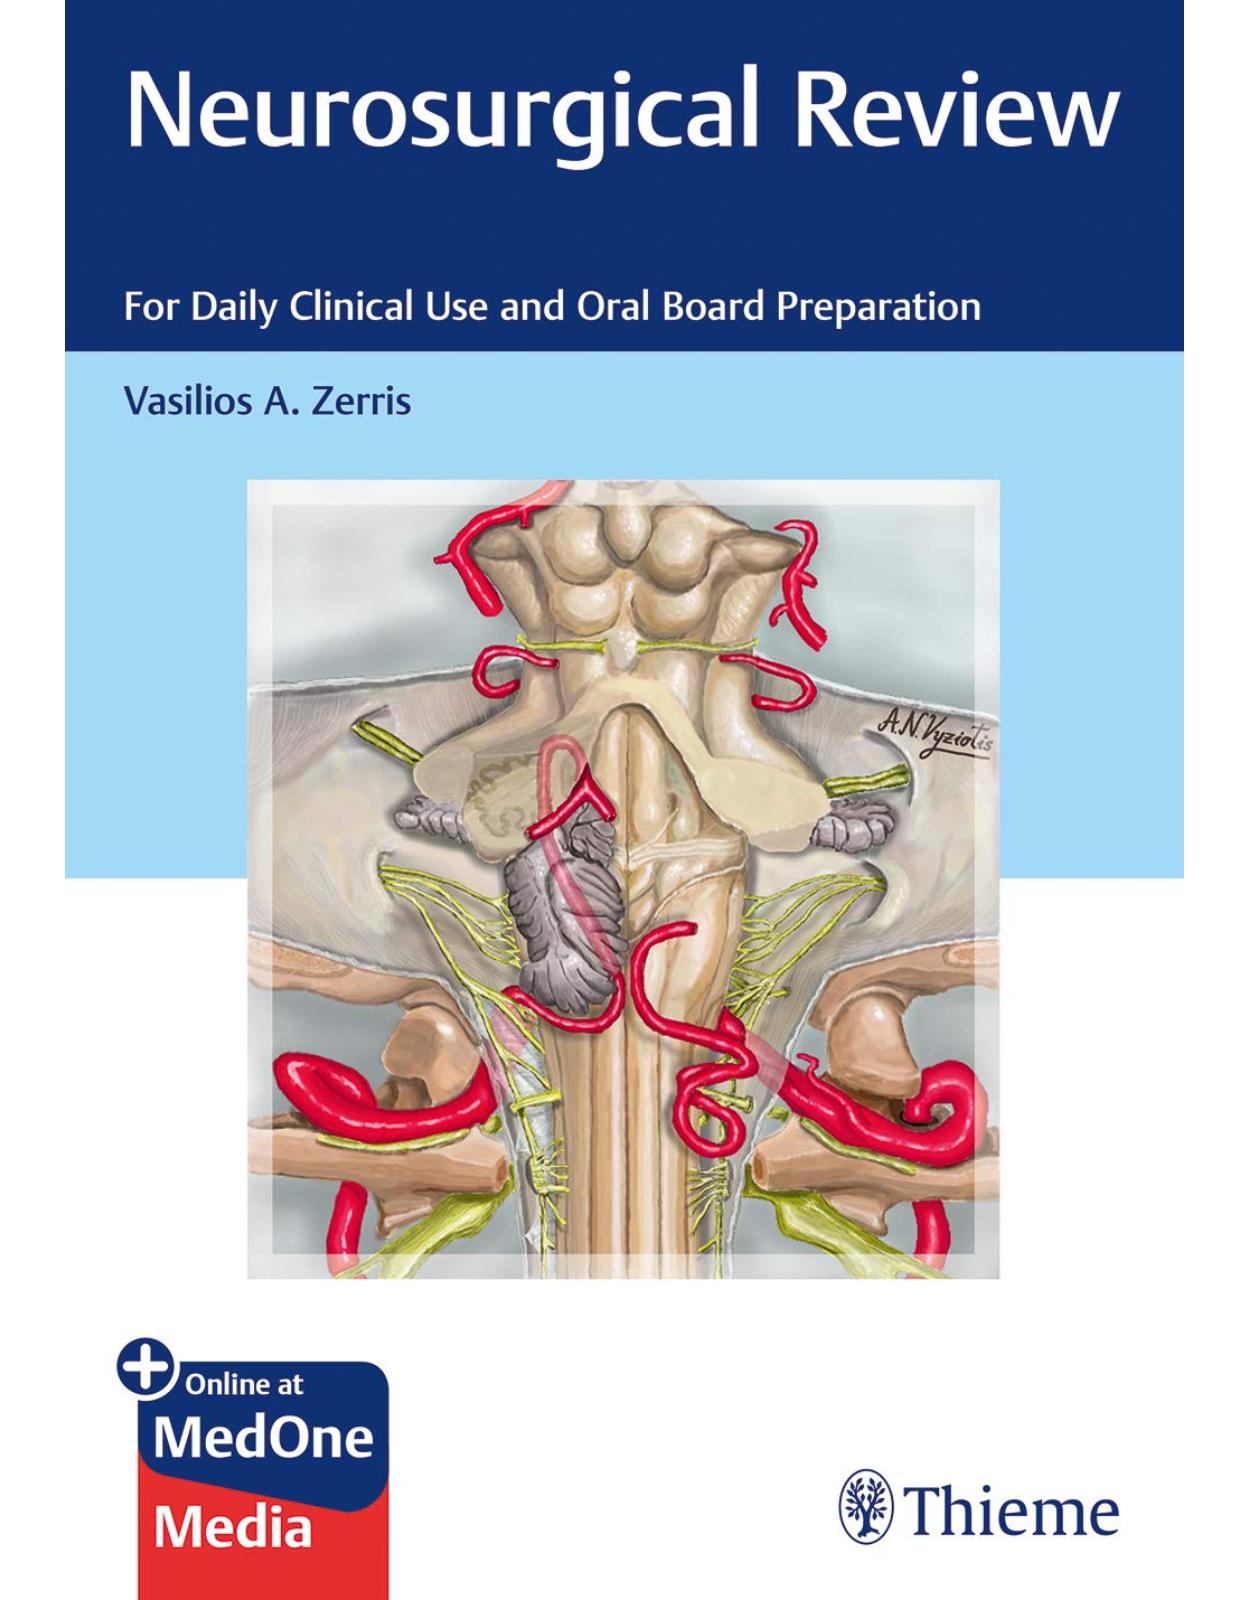 Neurosurgical Review: For Daily Clinical Use and Oral Board Preparation